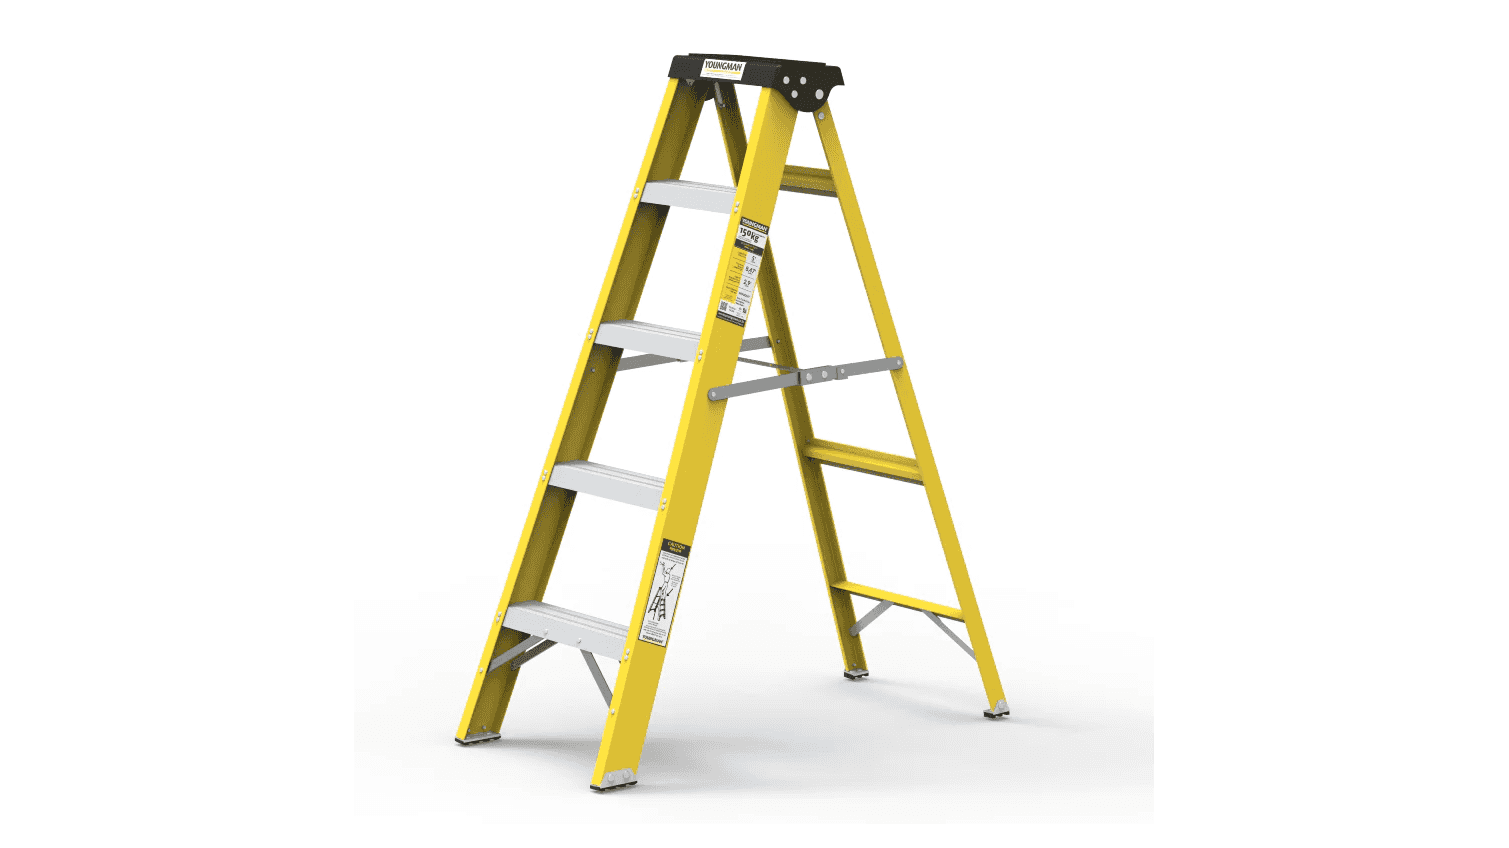 LADDER supporting image.